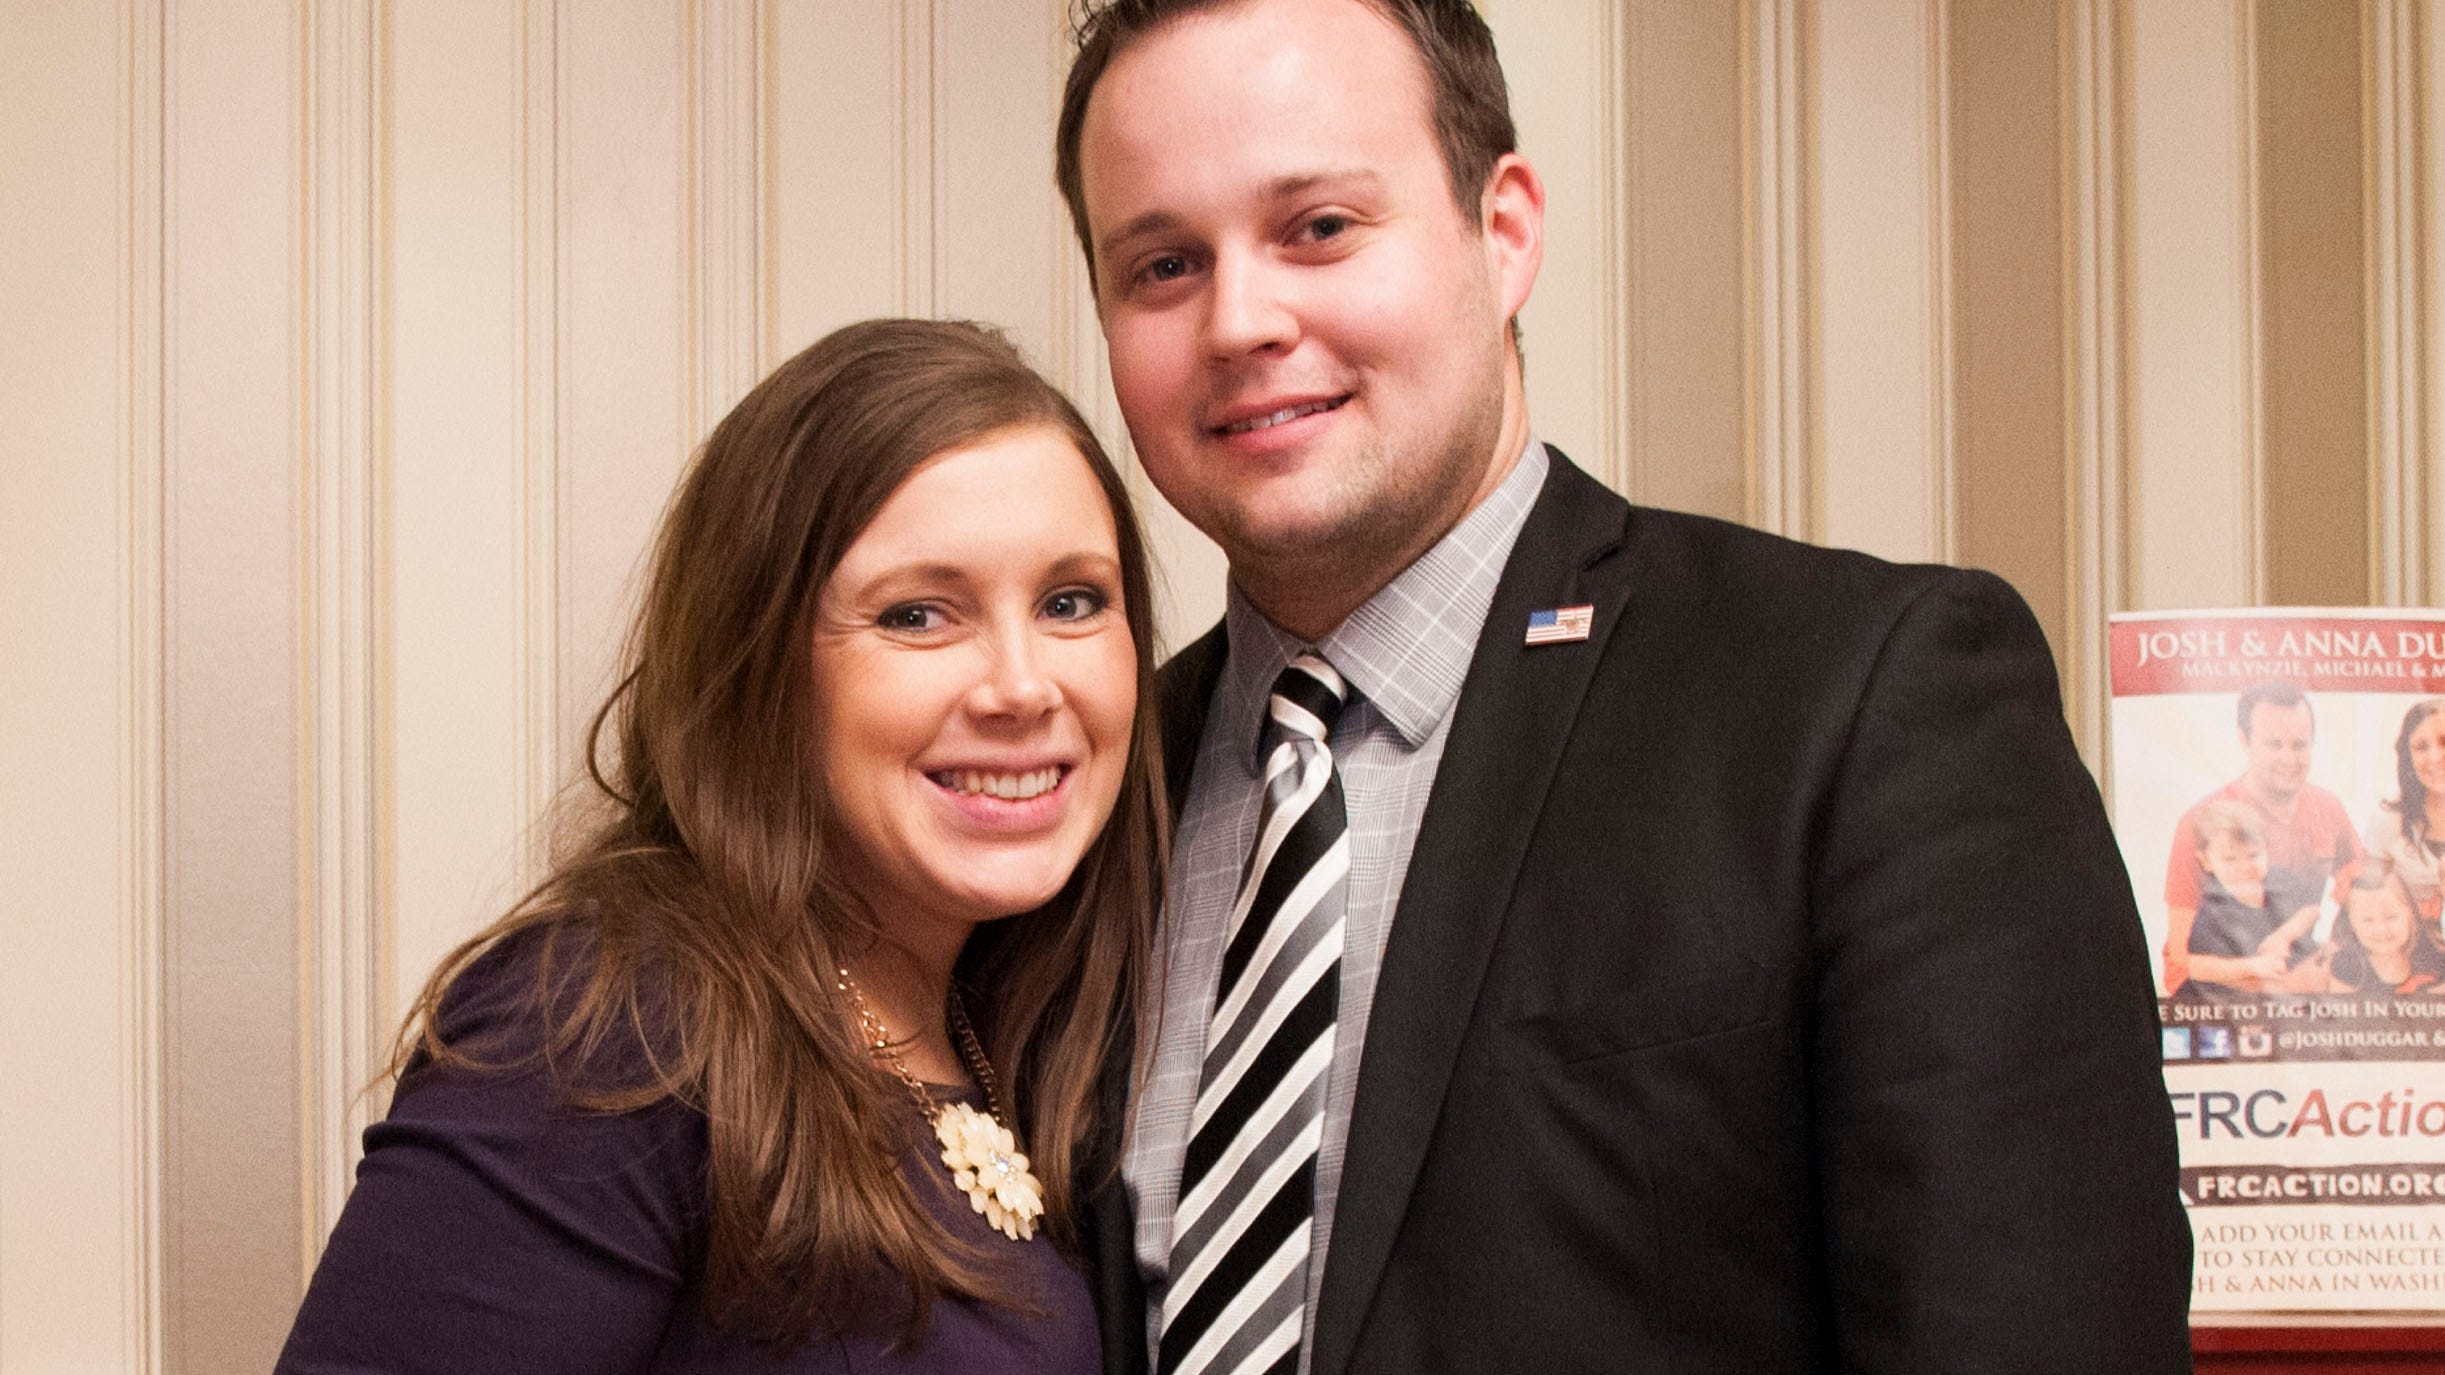 Josh Duggar to live with ‘close friends’ Maria, Lacount Reber until child pornography case trial: What to know